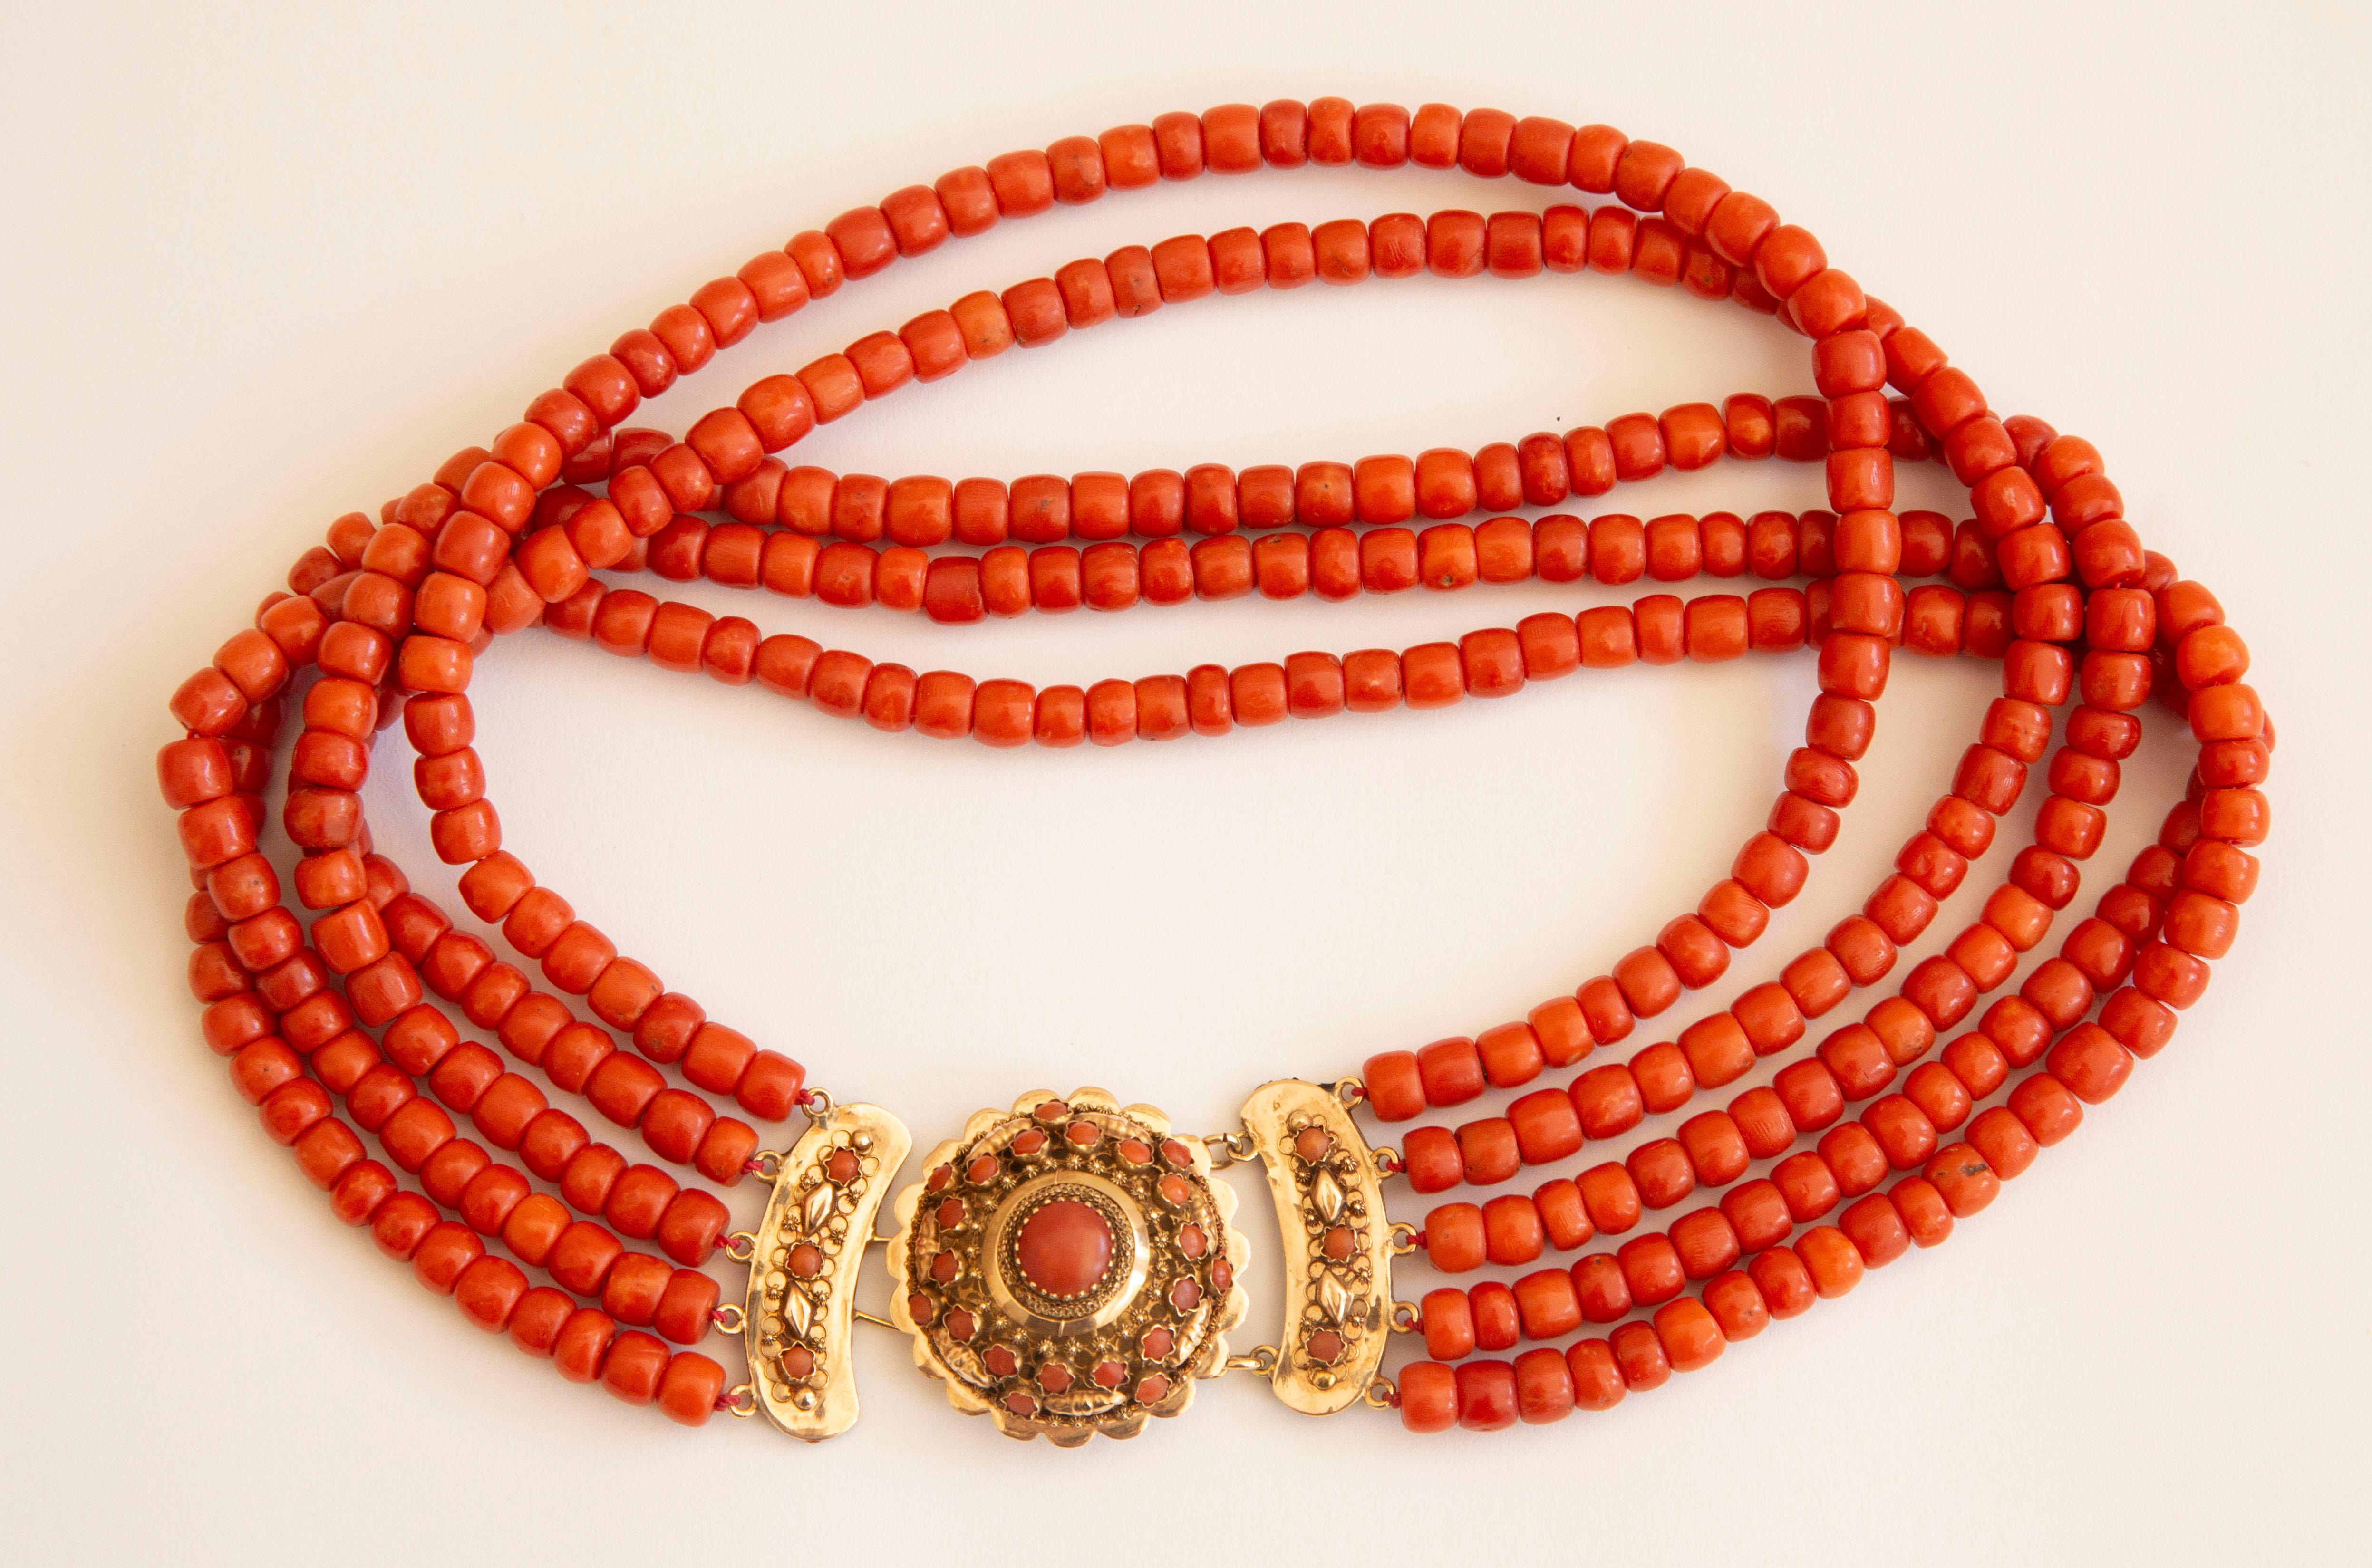 Victorian Antique Dutch 5-Row Red Coral Necklace with 14 Krt Yellow Gold Filigree Closure For Sale